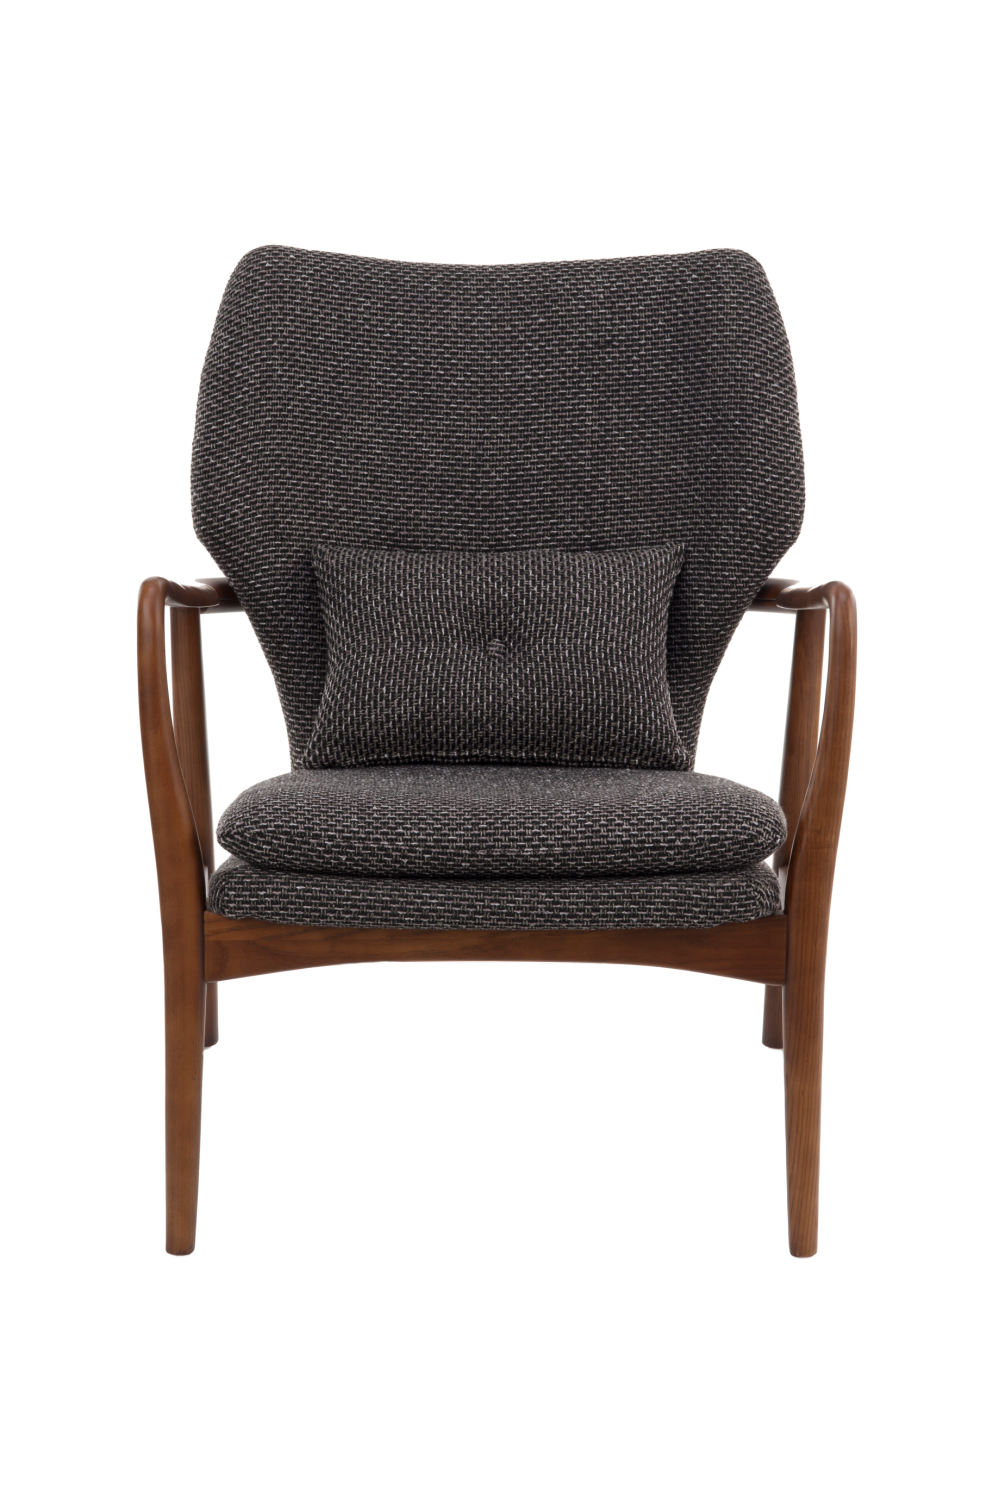 Fabric Upholstered Retro Chair | Pols Potten Peggy | Furniture